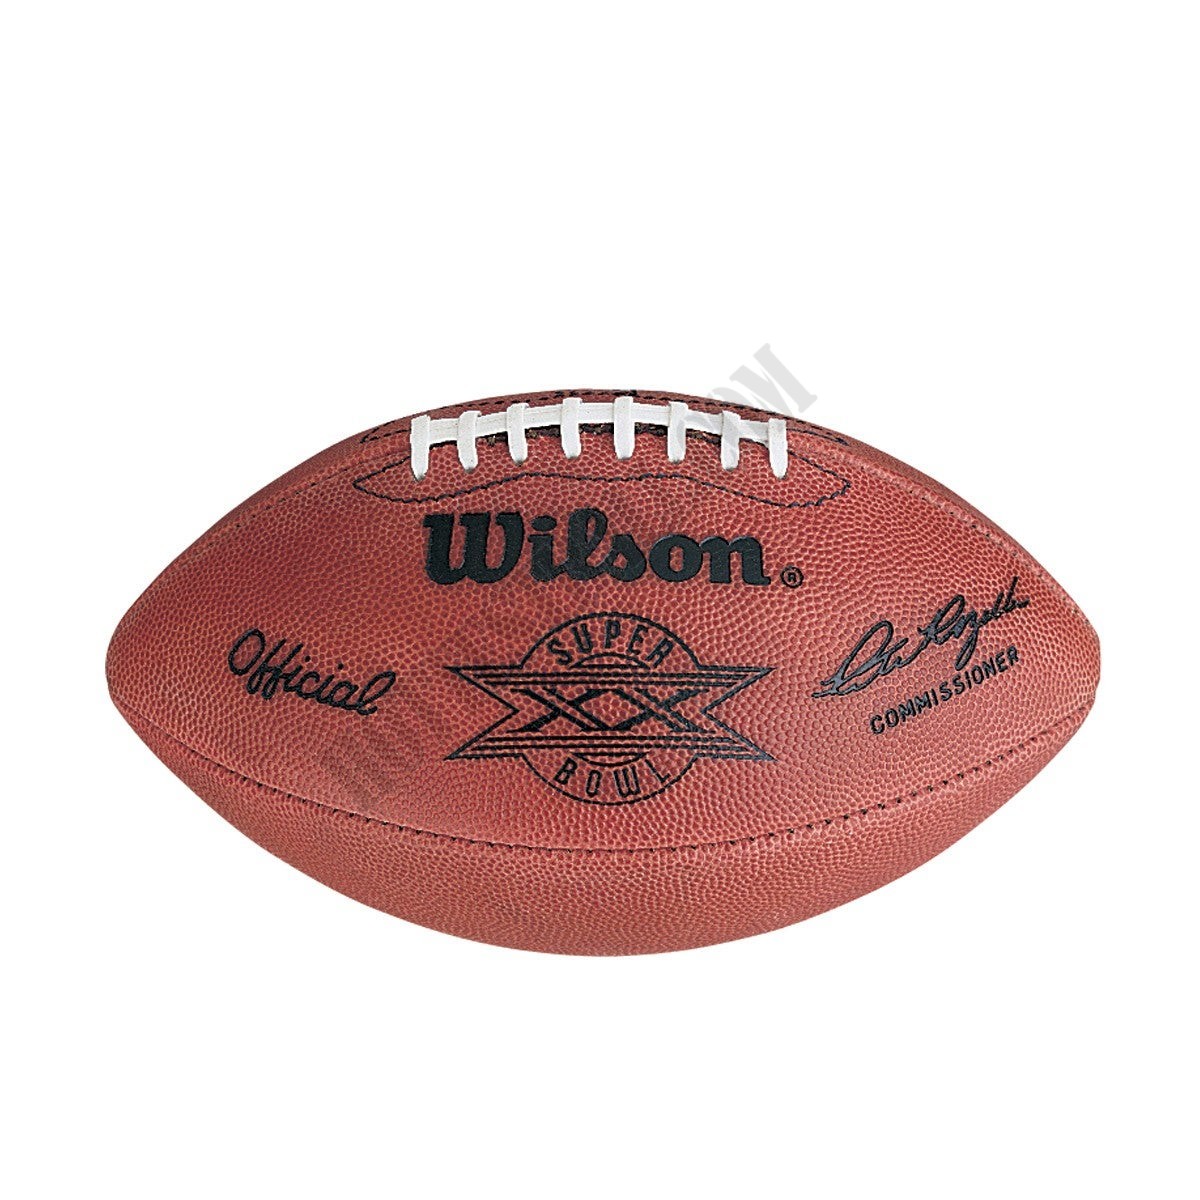 Super Bowl XX Game Football - Chicago Bears ● Wilson Promotions - -0